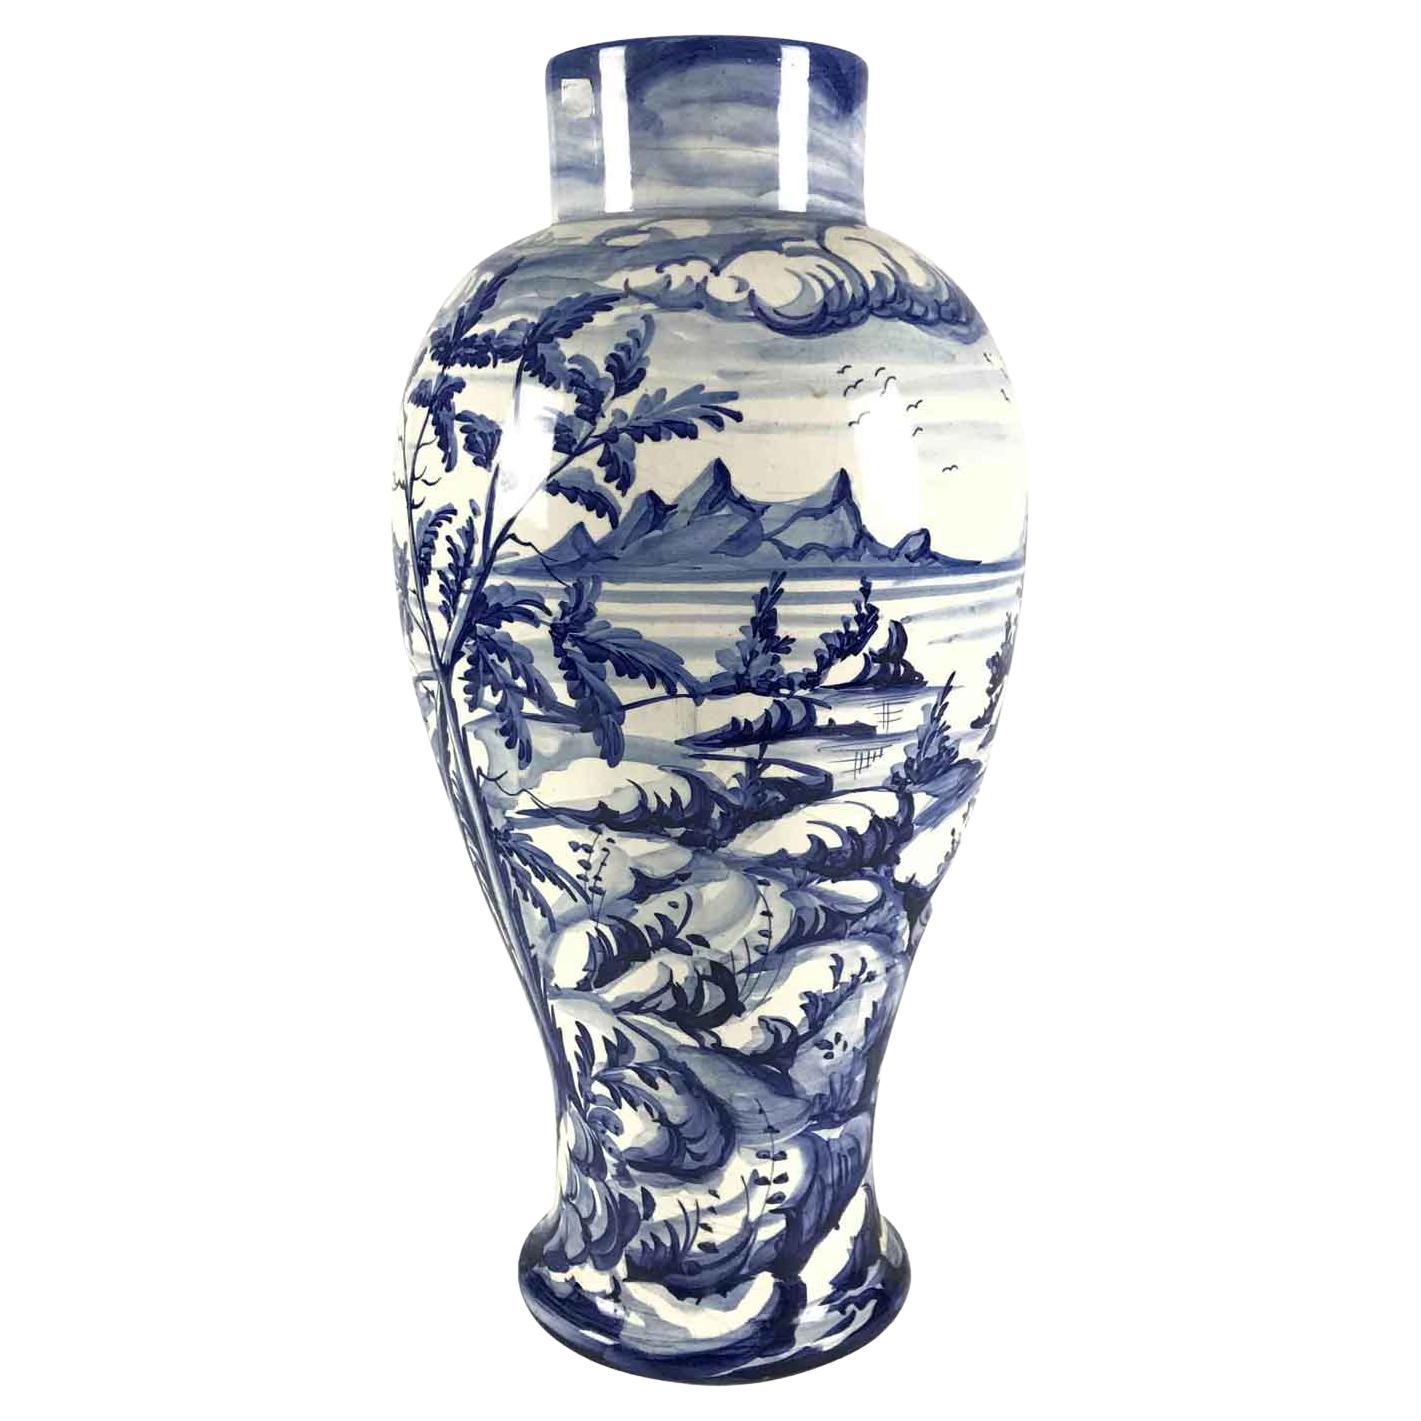 Florentine Vase in White and Blue Ceramic Landscape with Boats Taccini Vinci 1976 For Sale